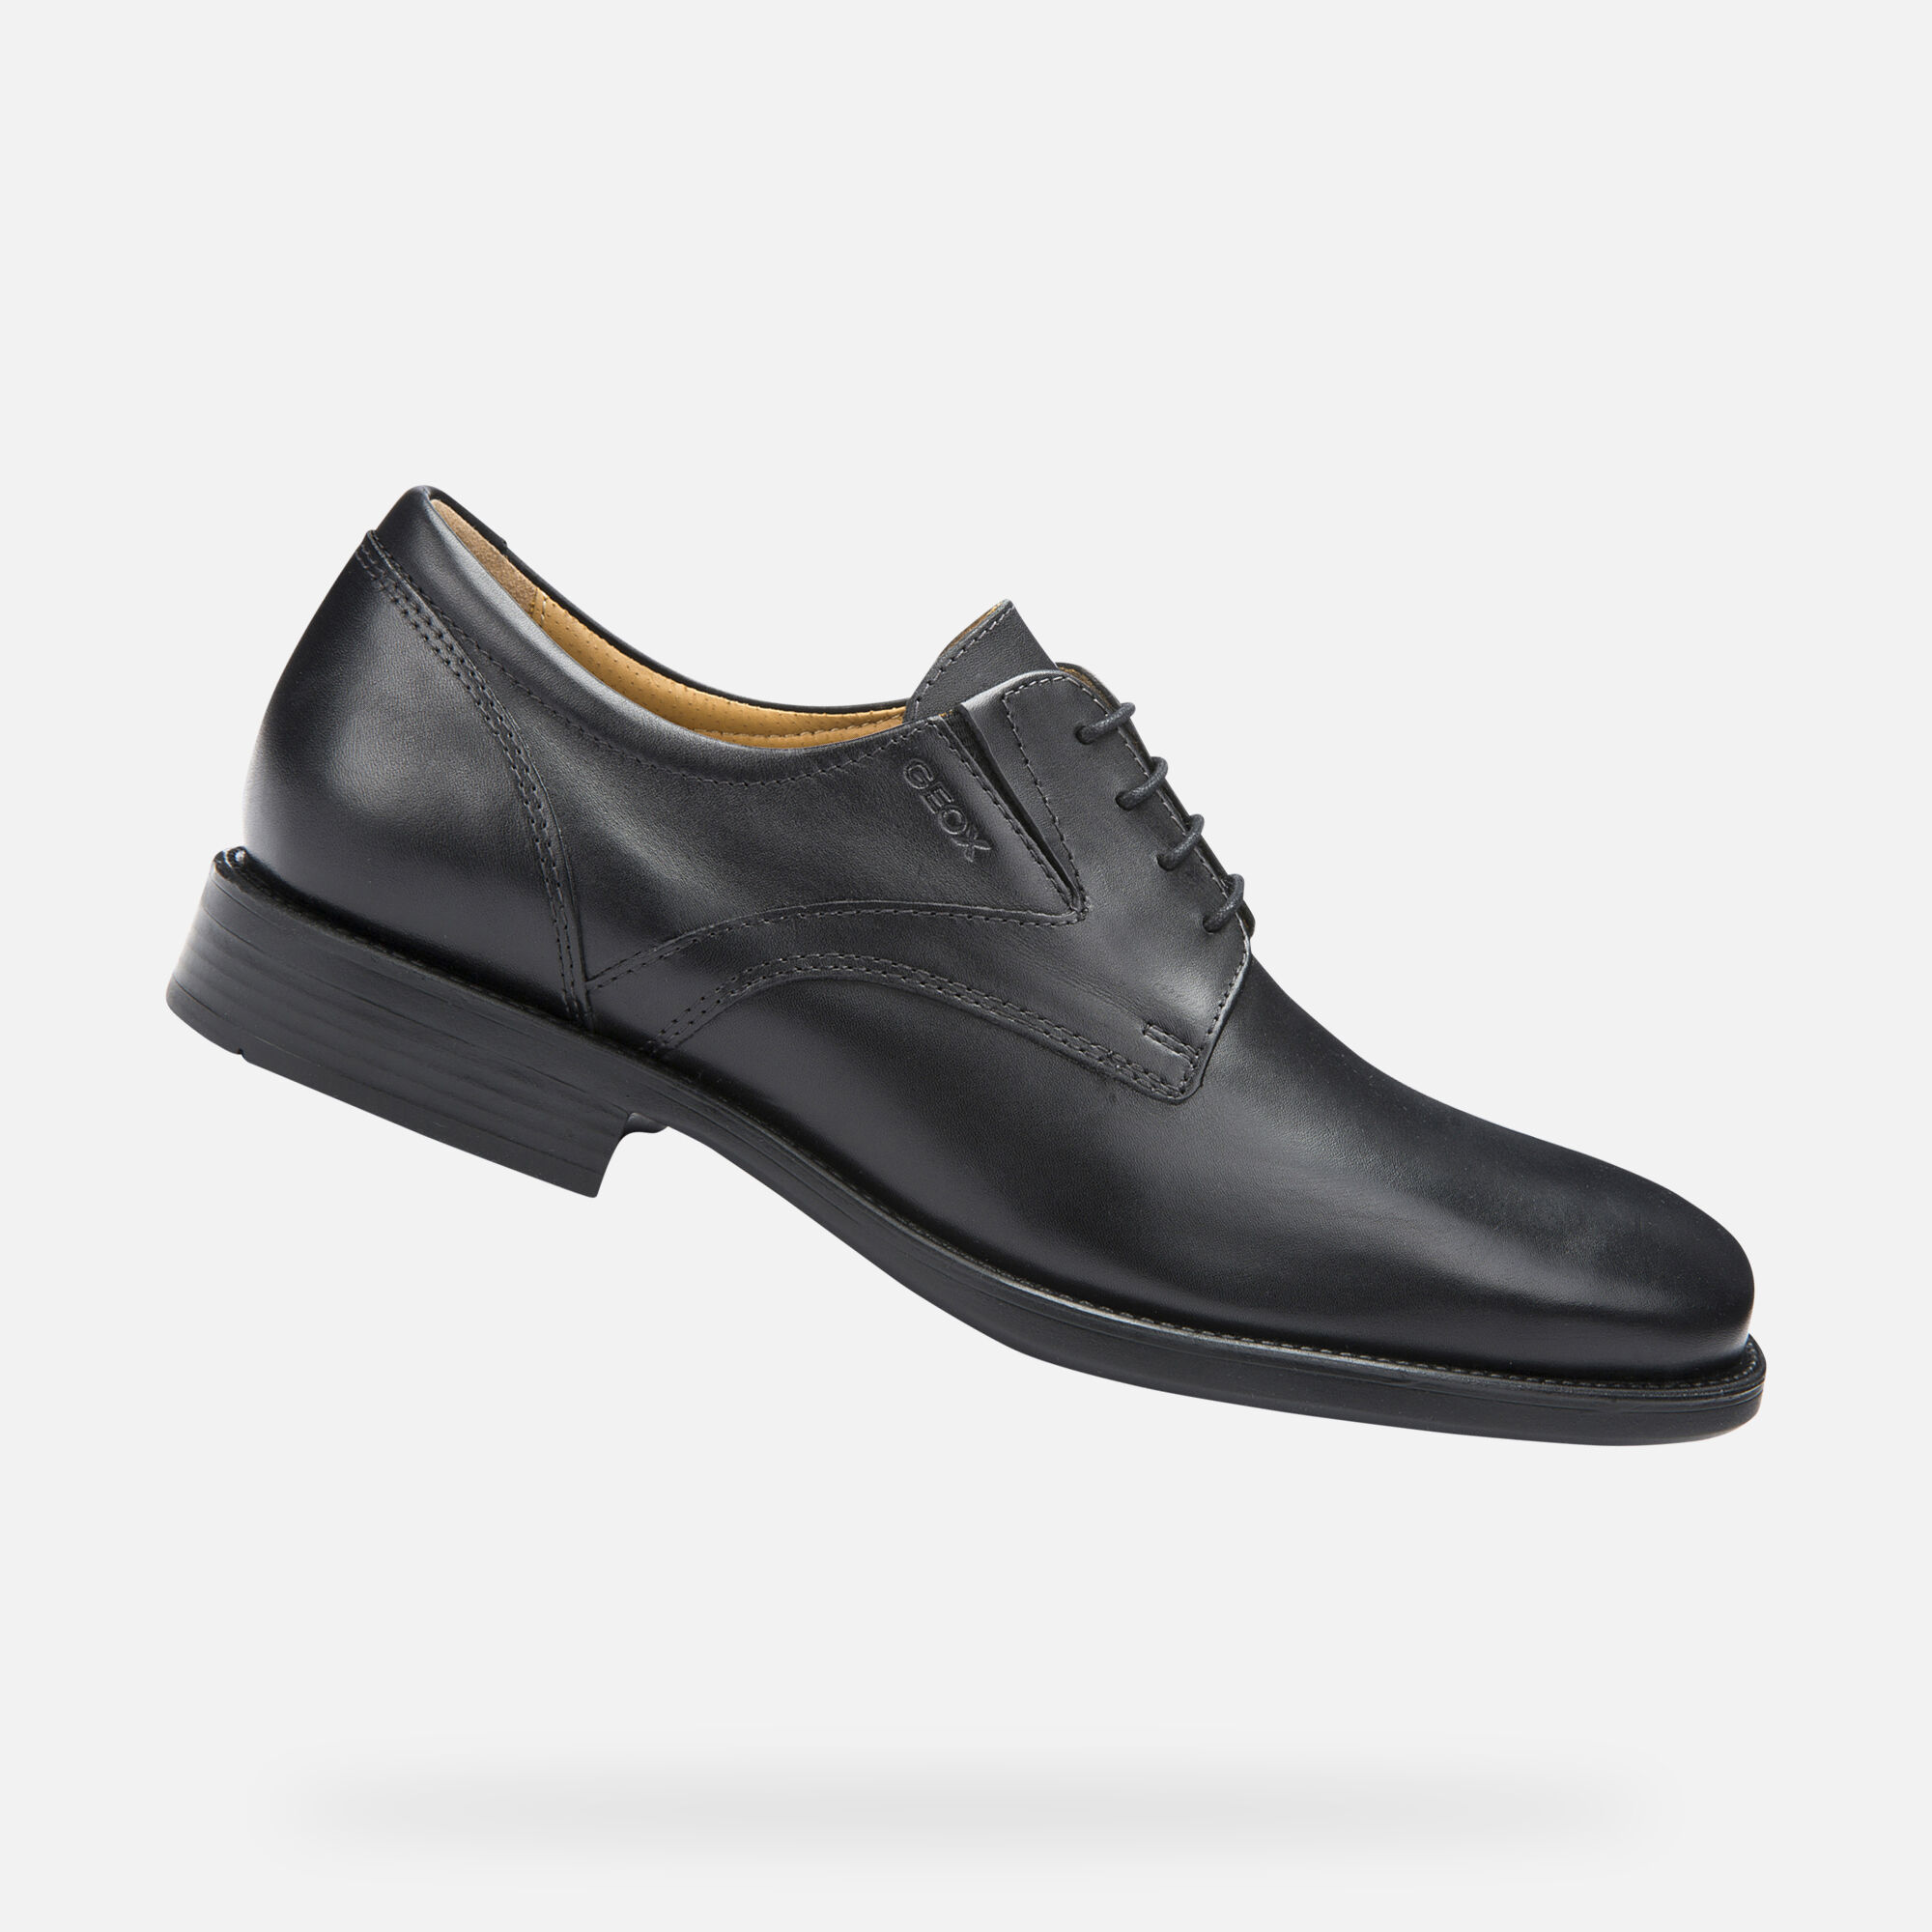 durable formal shoes